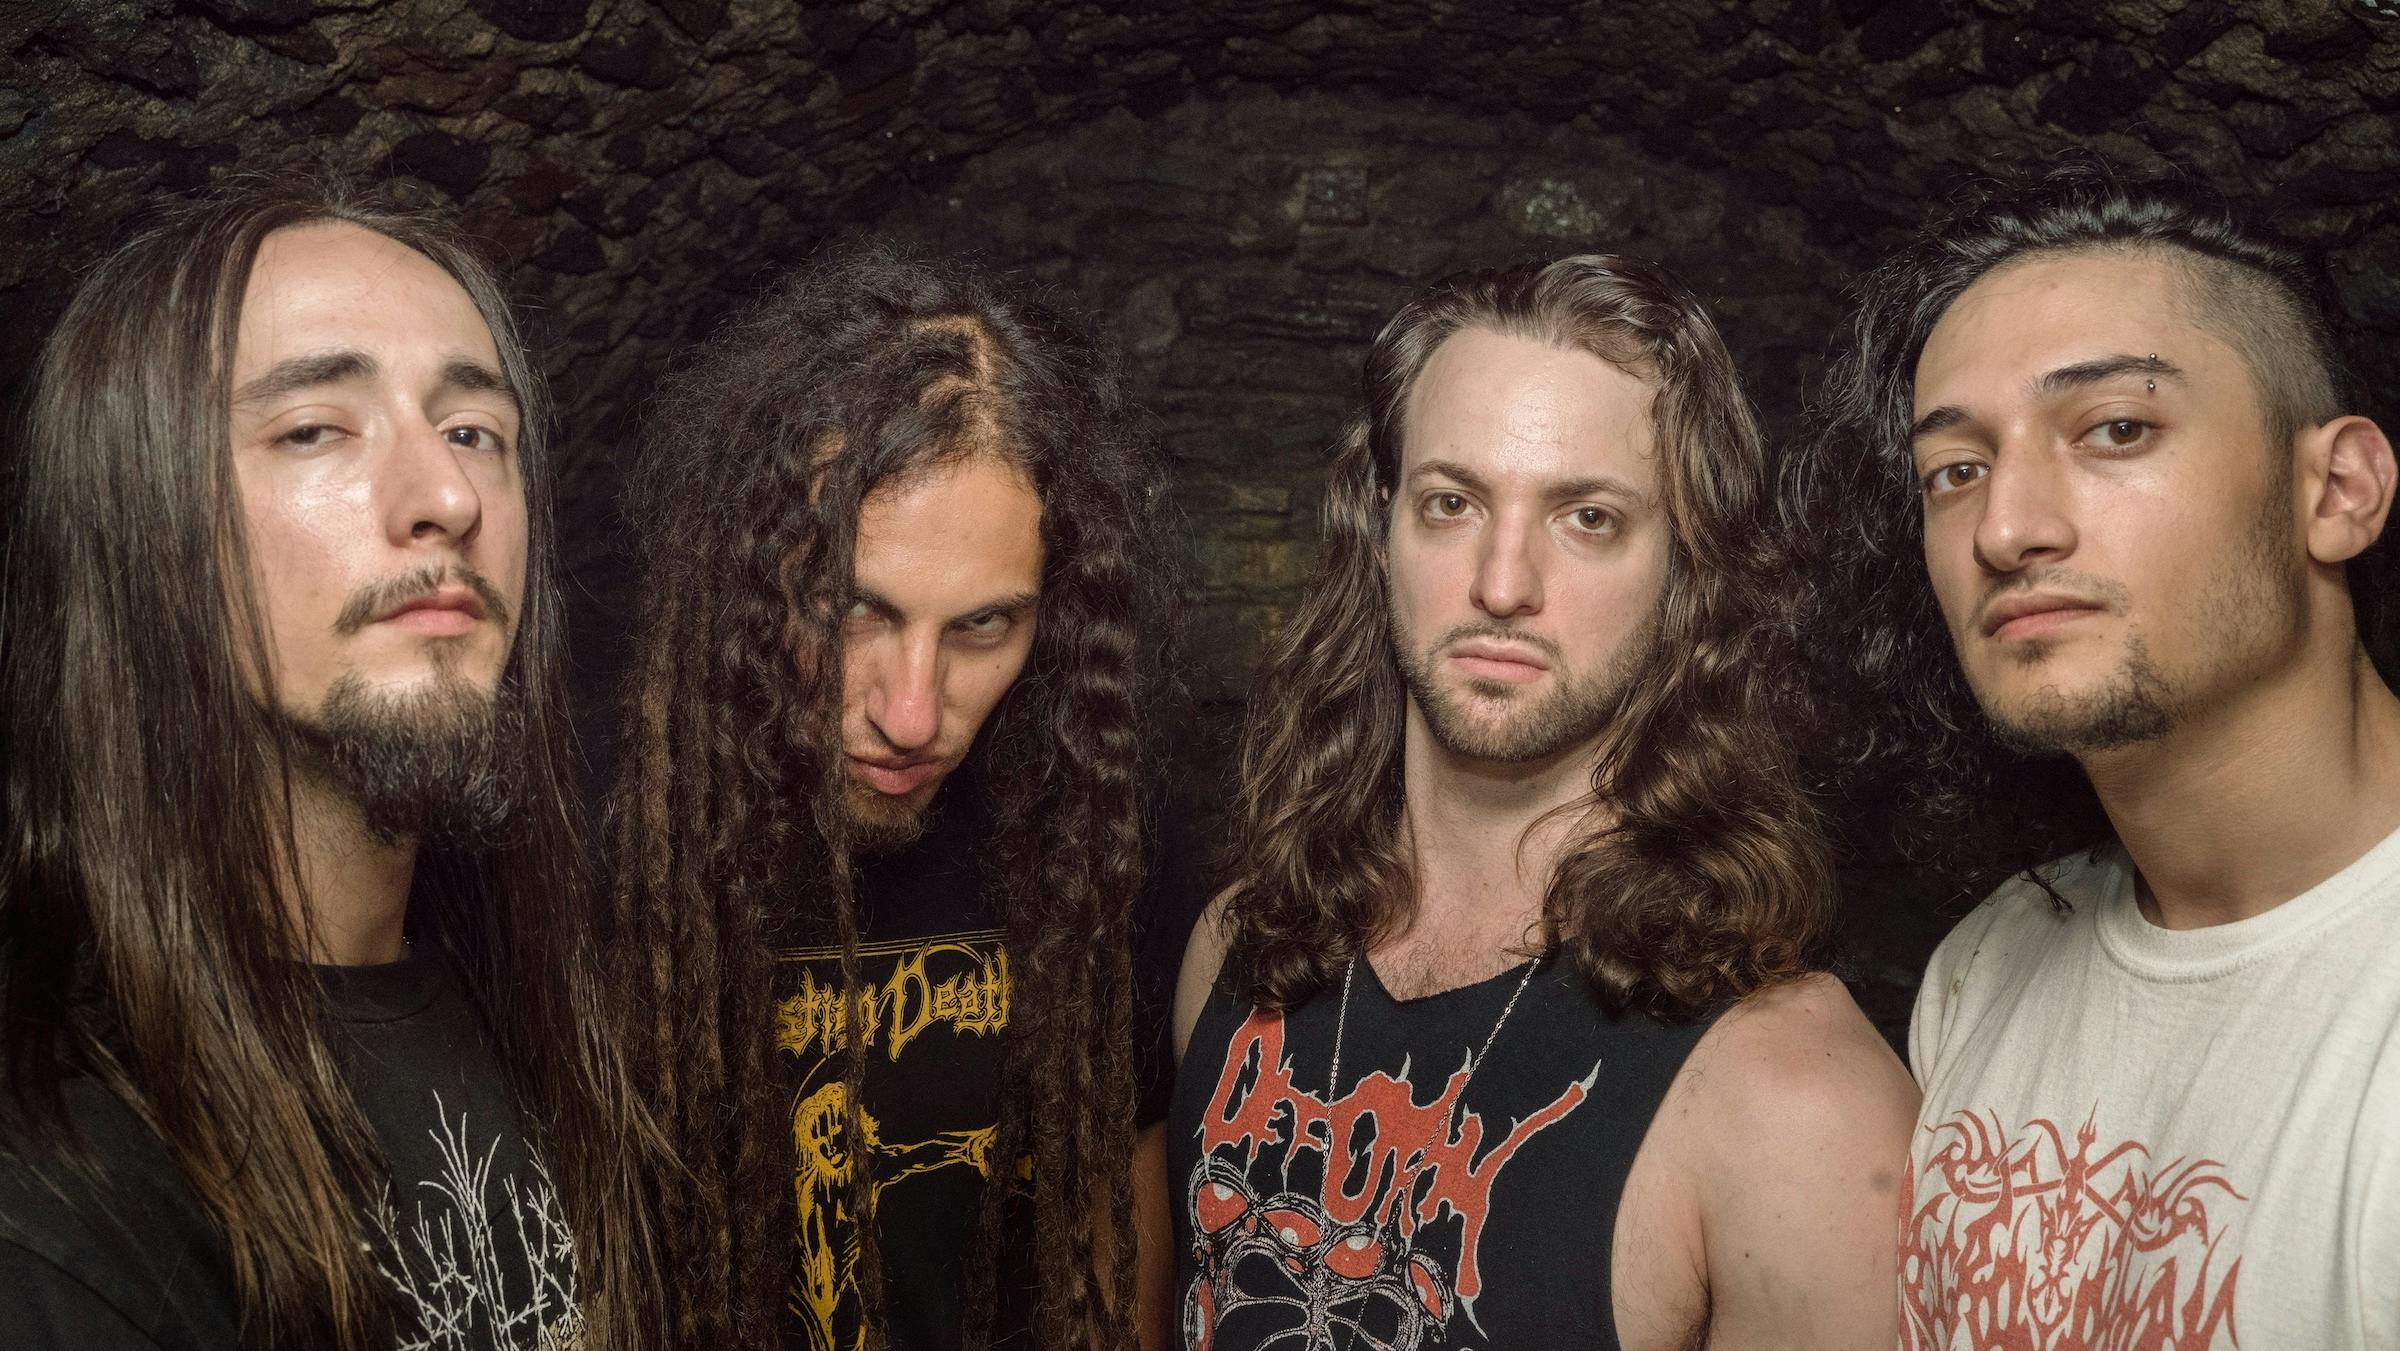 Exclusive: Basilysk's New Track Is A Blackened Thrash War Cry